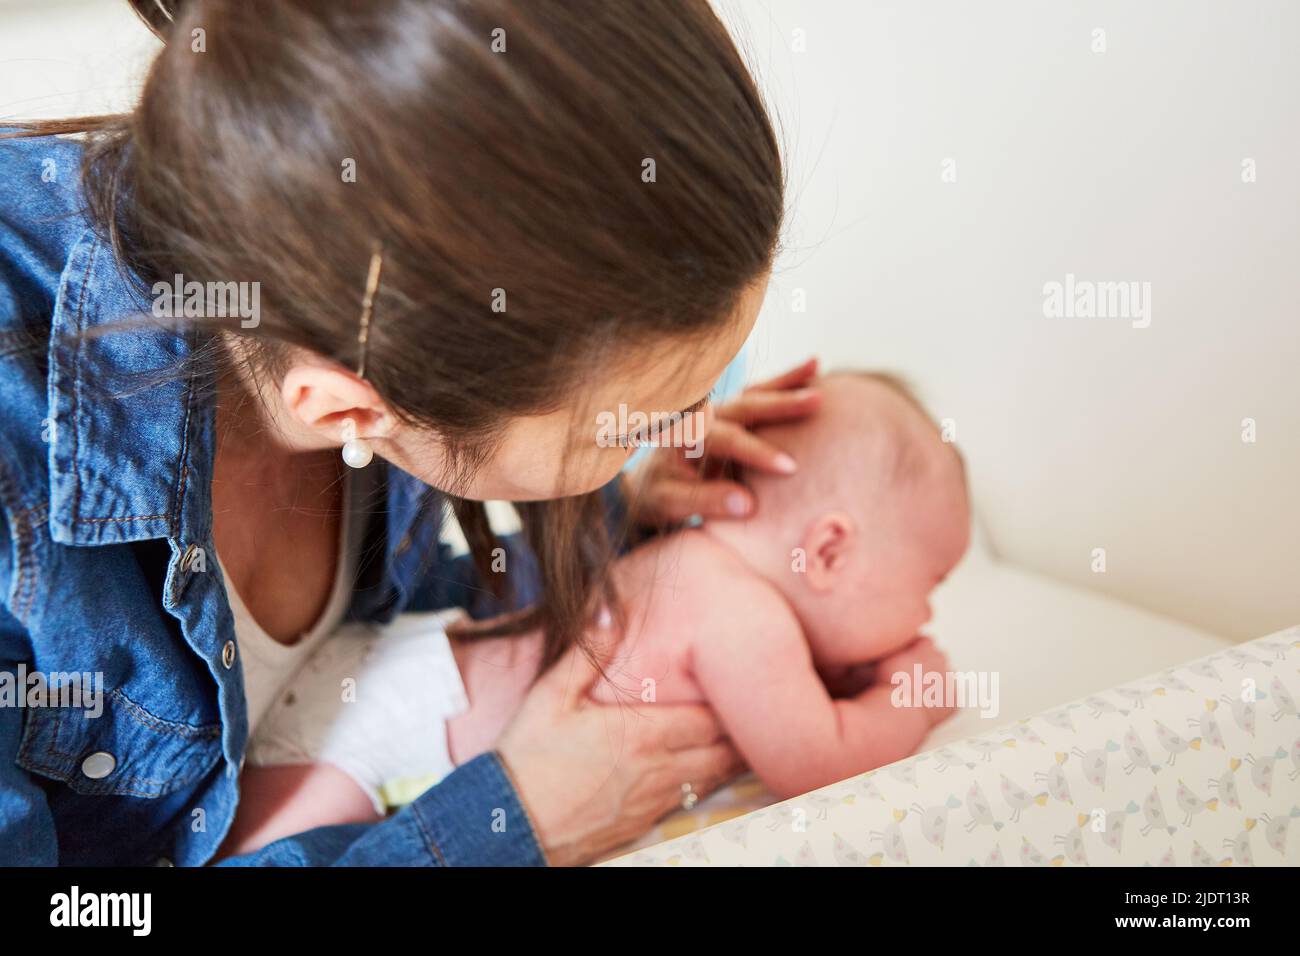 Caring mother carefully examines her baby's delicate skin while changing diaper Stock Photo